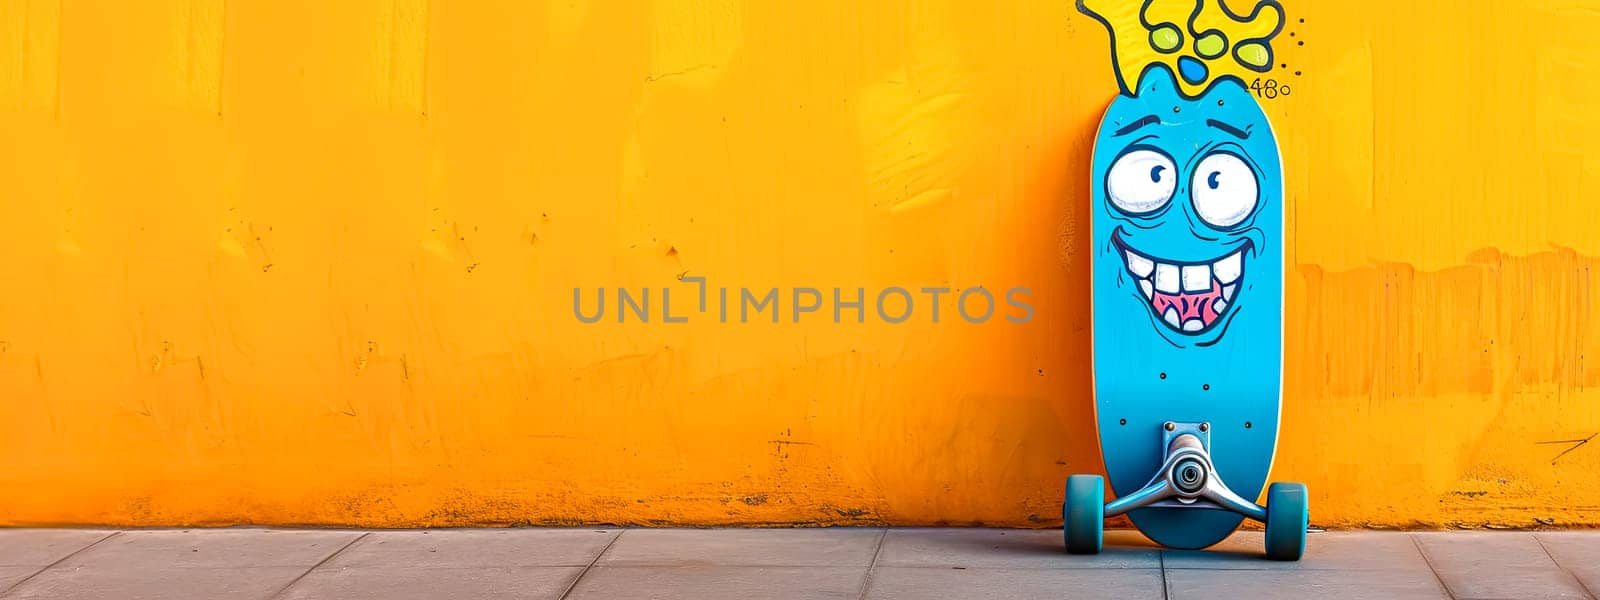 Blue skateboard with cartoon face leaning on yellow wall, copy space